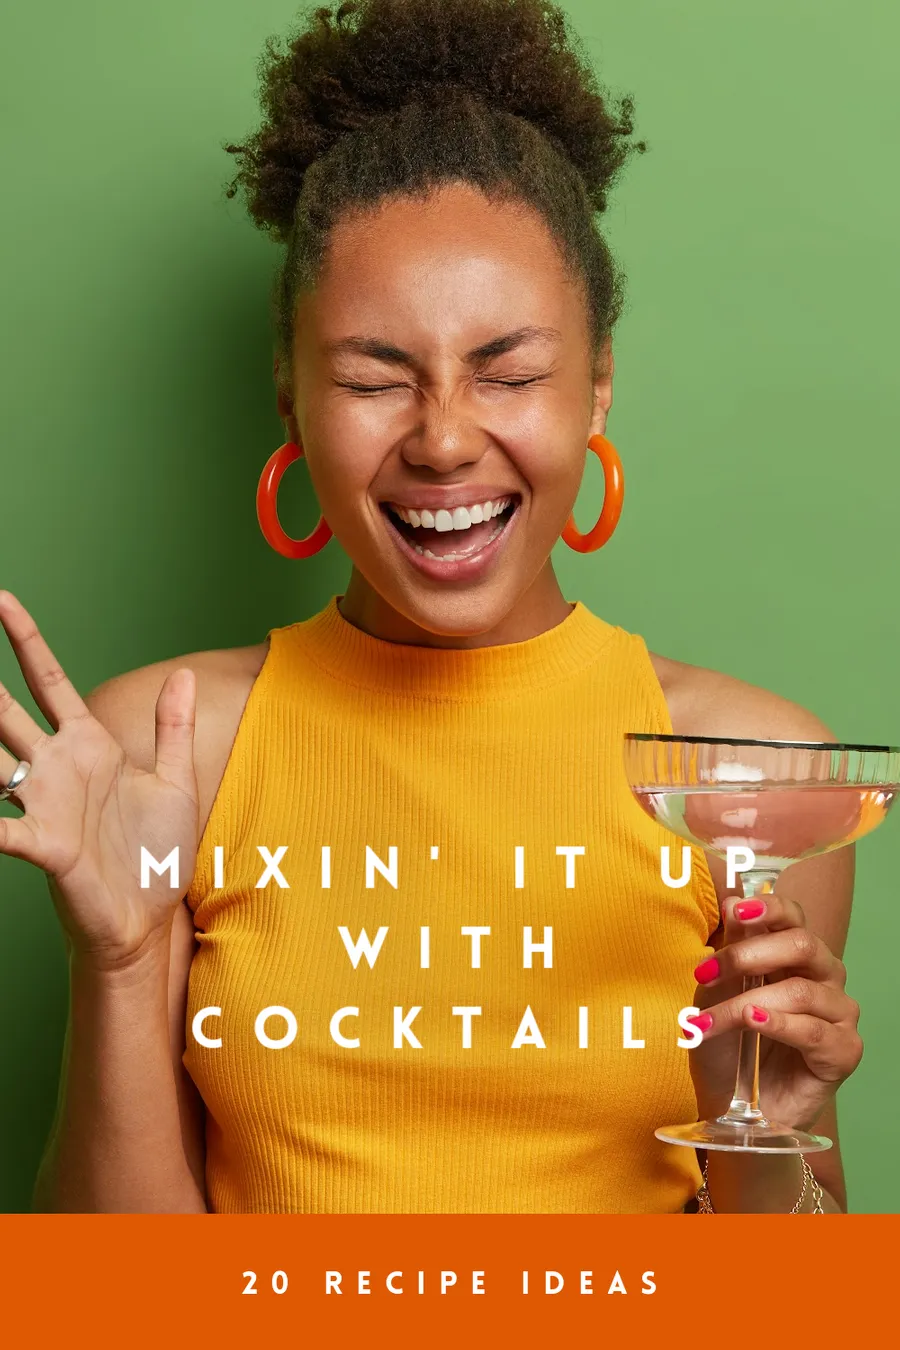 Mixin' it up with cocktails pinterest template